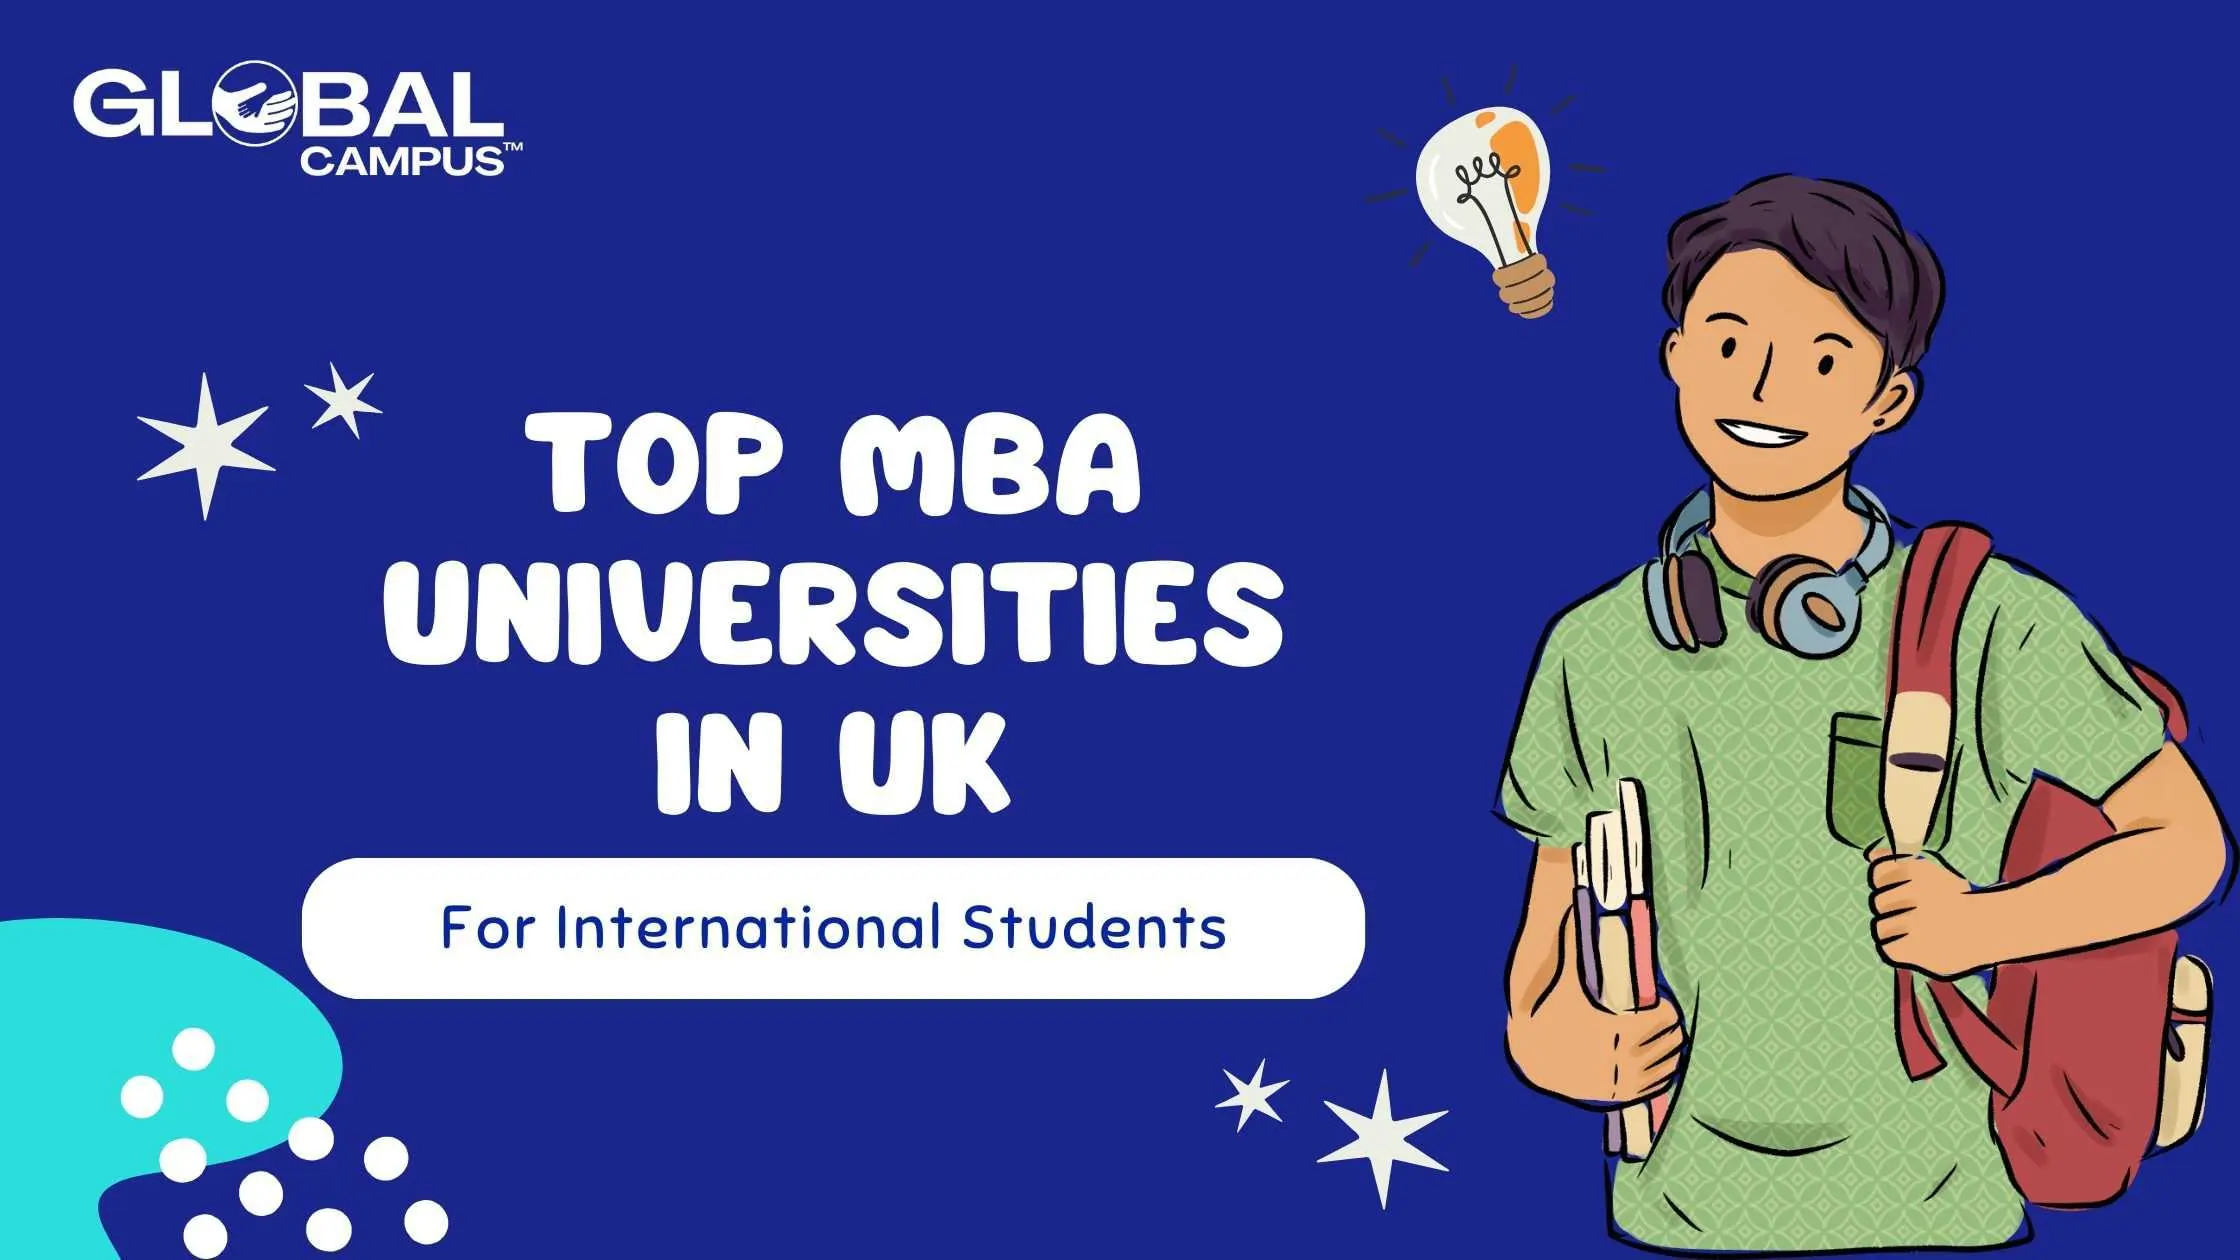 Top MBA Universities in UK for International Students